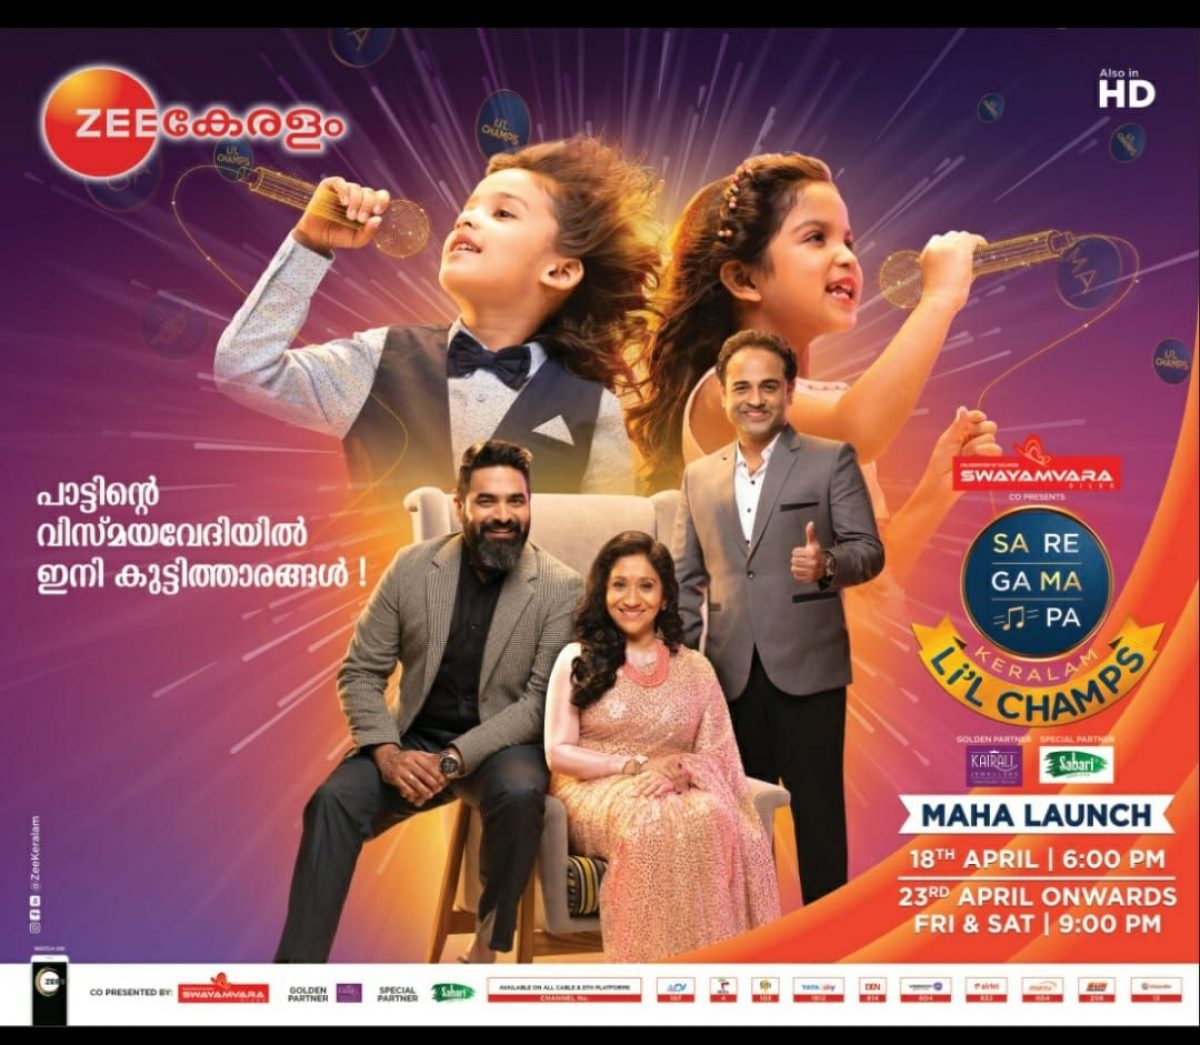 SaReGaMaPa Keralam Li’l Champs premieres on July 18th, 7 PM with an Exciting Musical Extravagaza